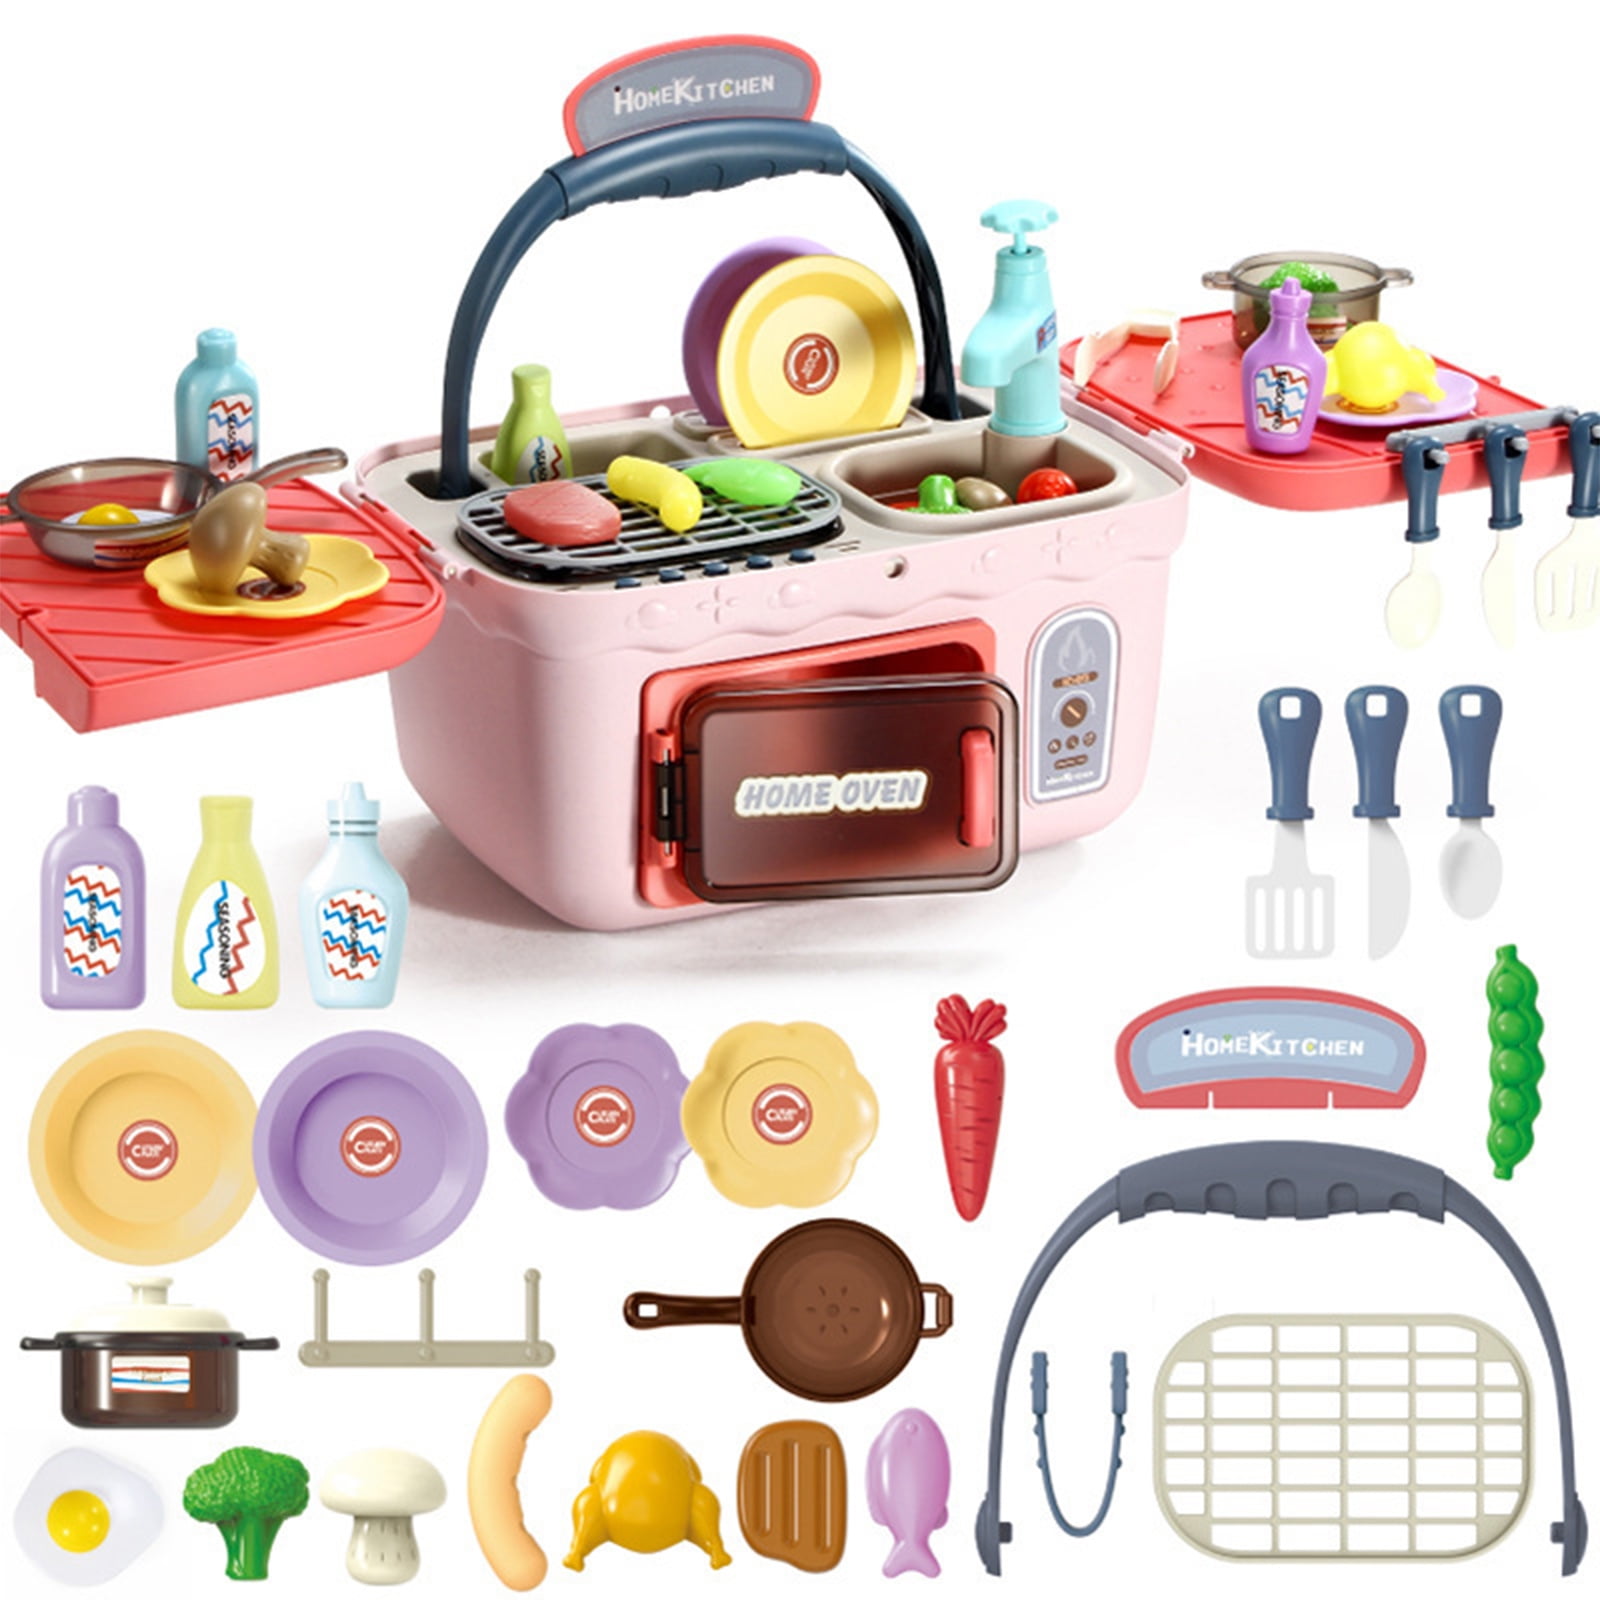 Kitchen Set Multifunction Cooking Kids Toy with Sound and Light Pretend Play Includes Play Food, Kit